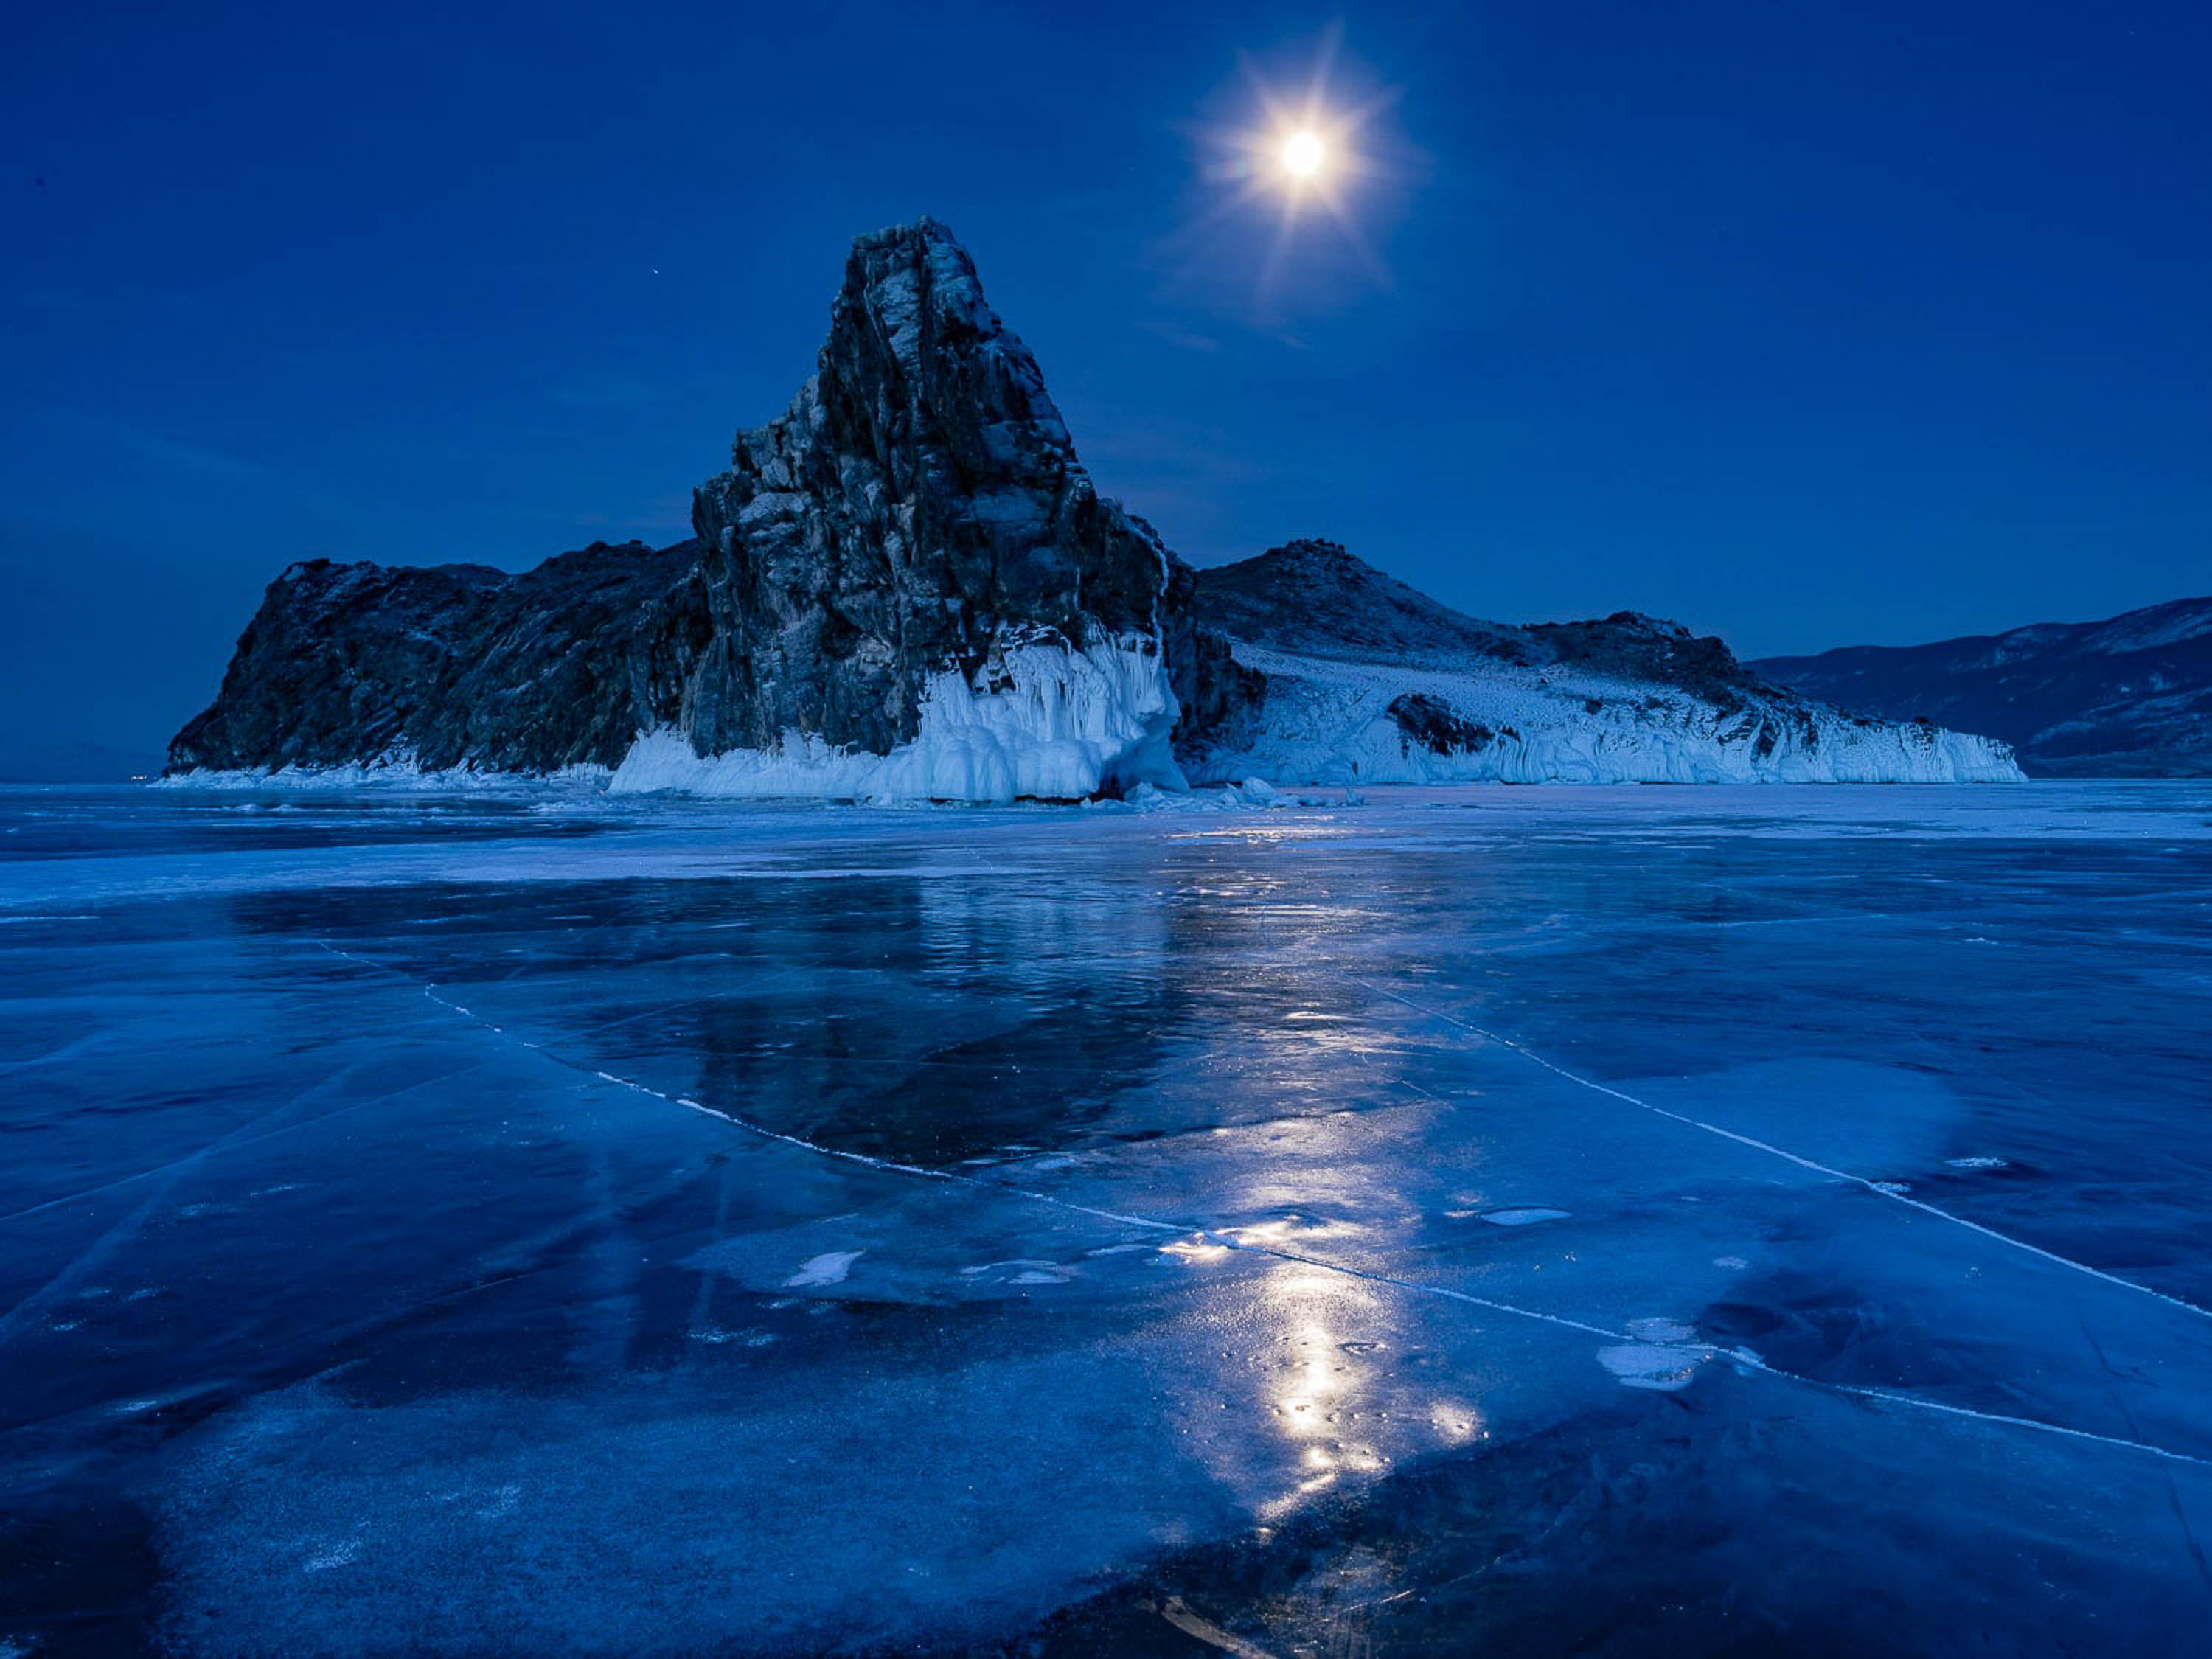 Frozen lake with a great black mountain, and a shining moon besides, Lake Baikal #51, Siberia, Russia